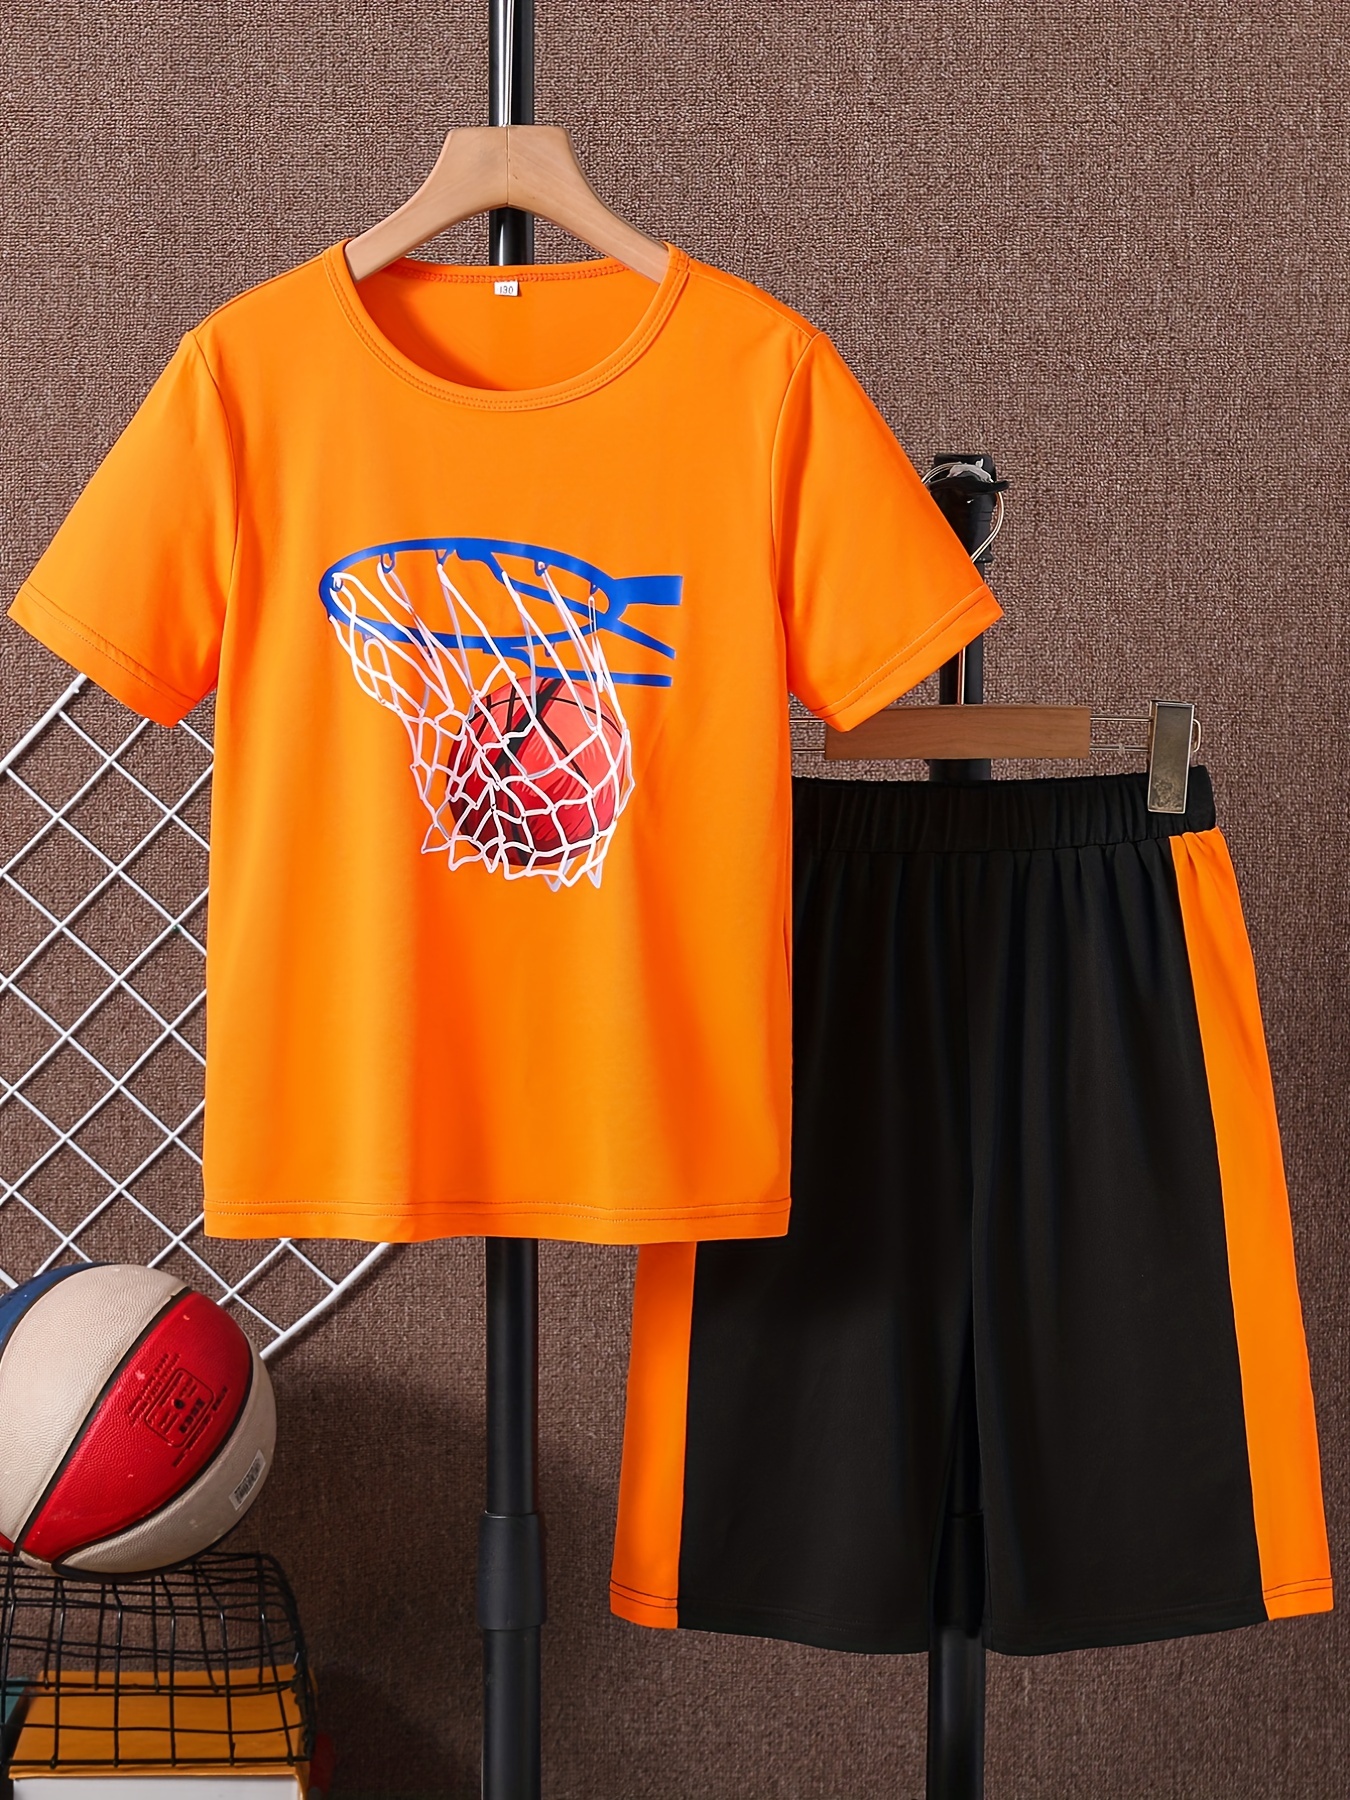 Boys Basketball Graphic Outfit Short Sleeves Round Neck T-shirt & Shorts  Casual For Summer Kids Clothes